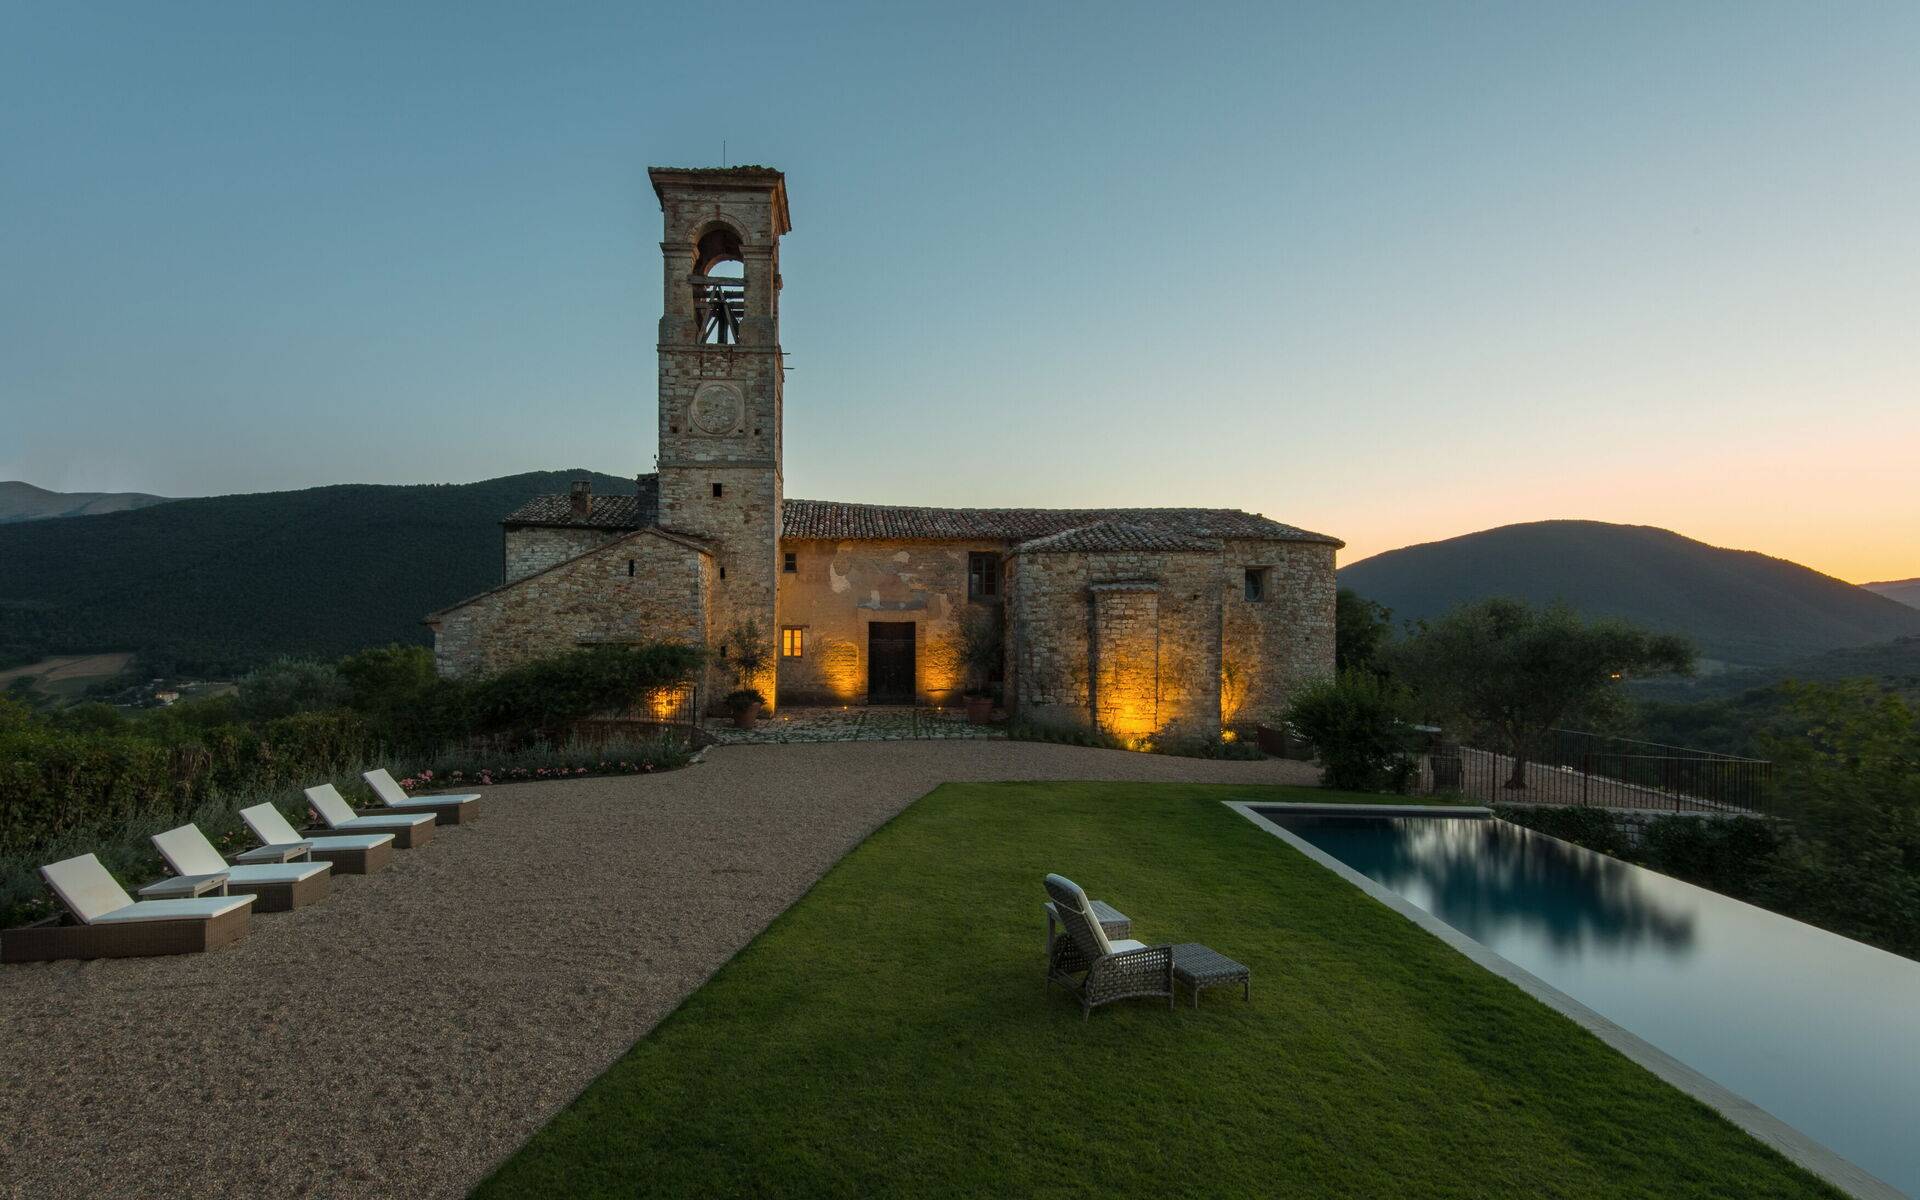 Marvellous Villa surrounded by the beautiful Umbrian hills